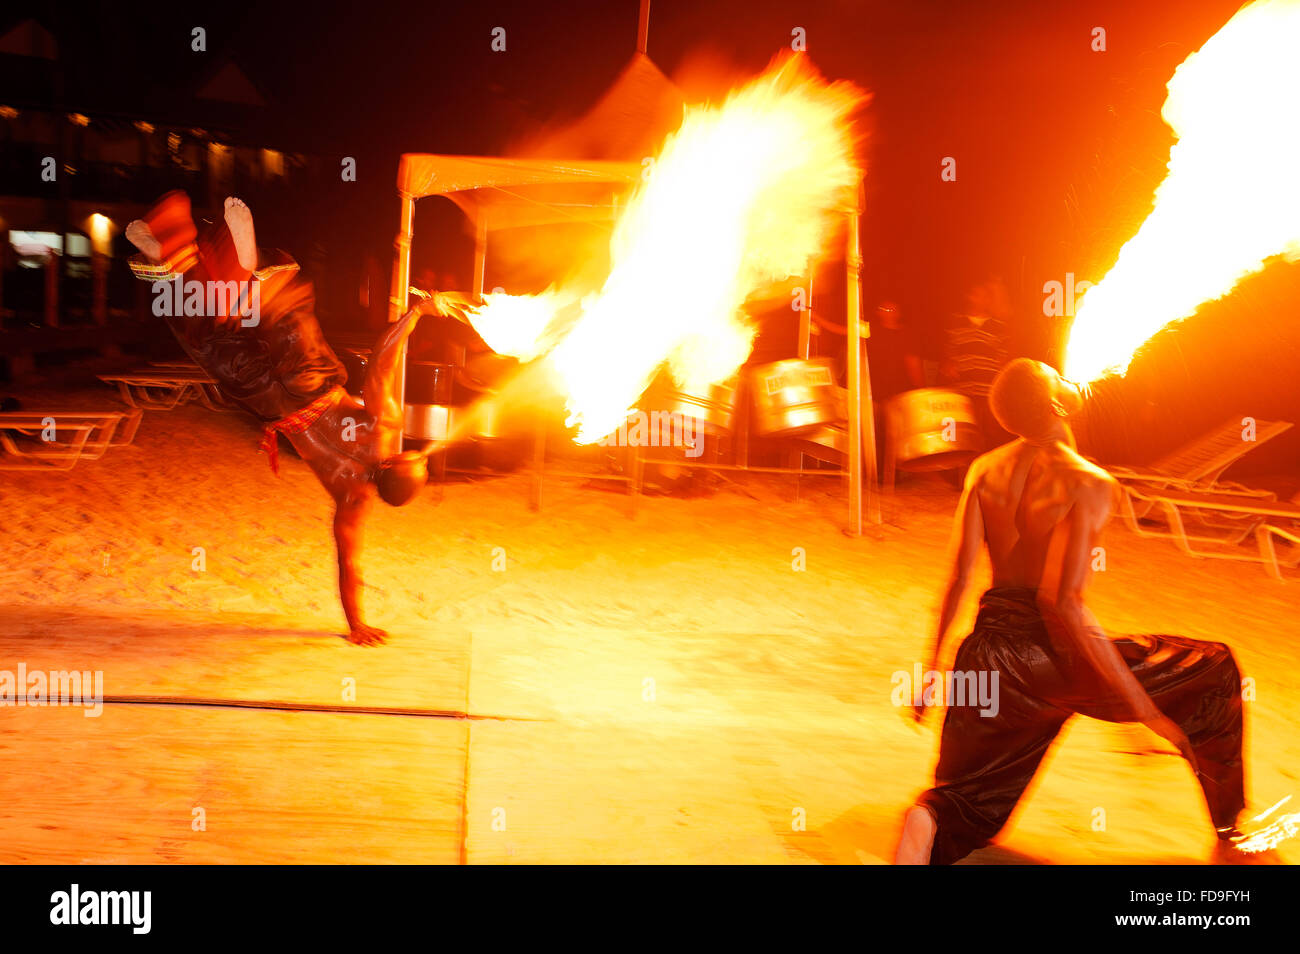 Flame throwers perform on the beach at night, Santa Lucia, Lesser Antilles, Caribbean Stock Photo